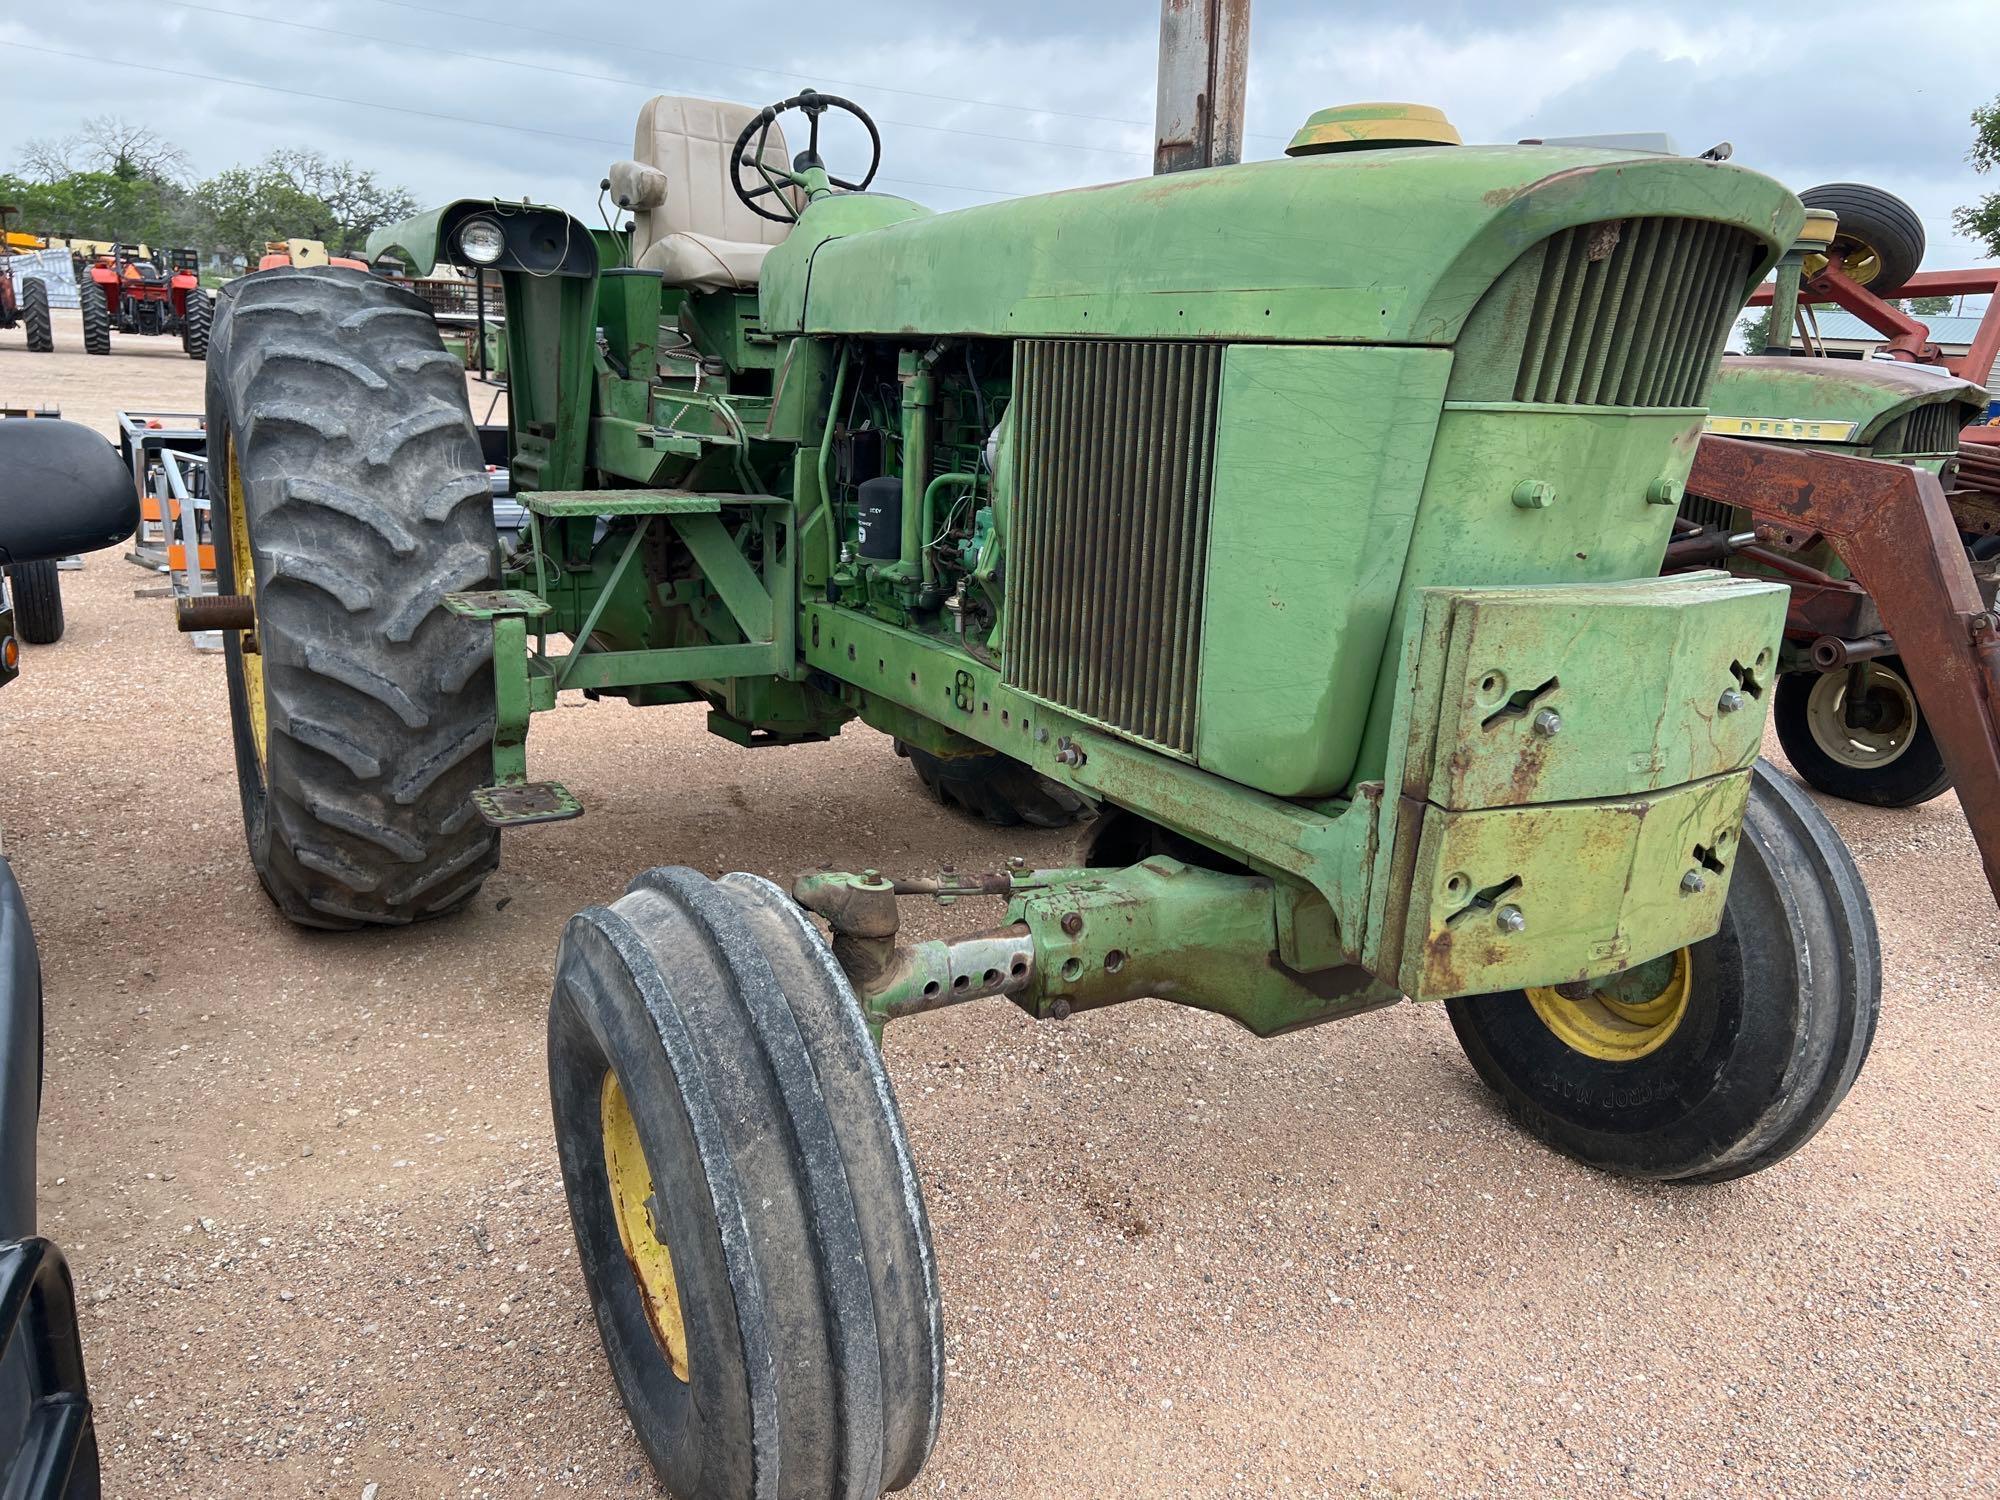 John Deere 4620 - Runs & Works as it Should. Local Farm Sell-Out